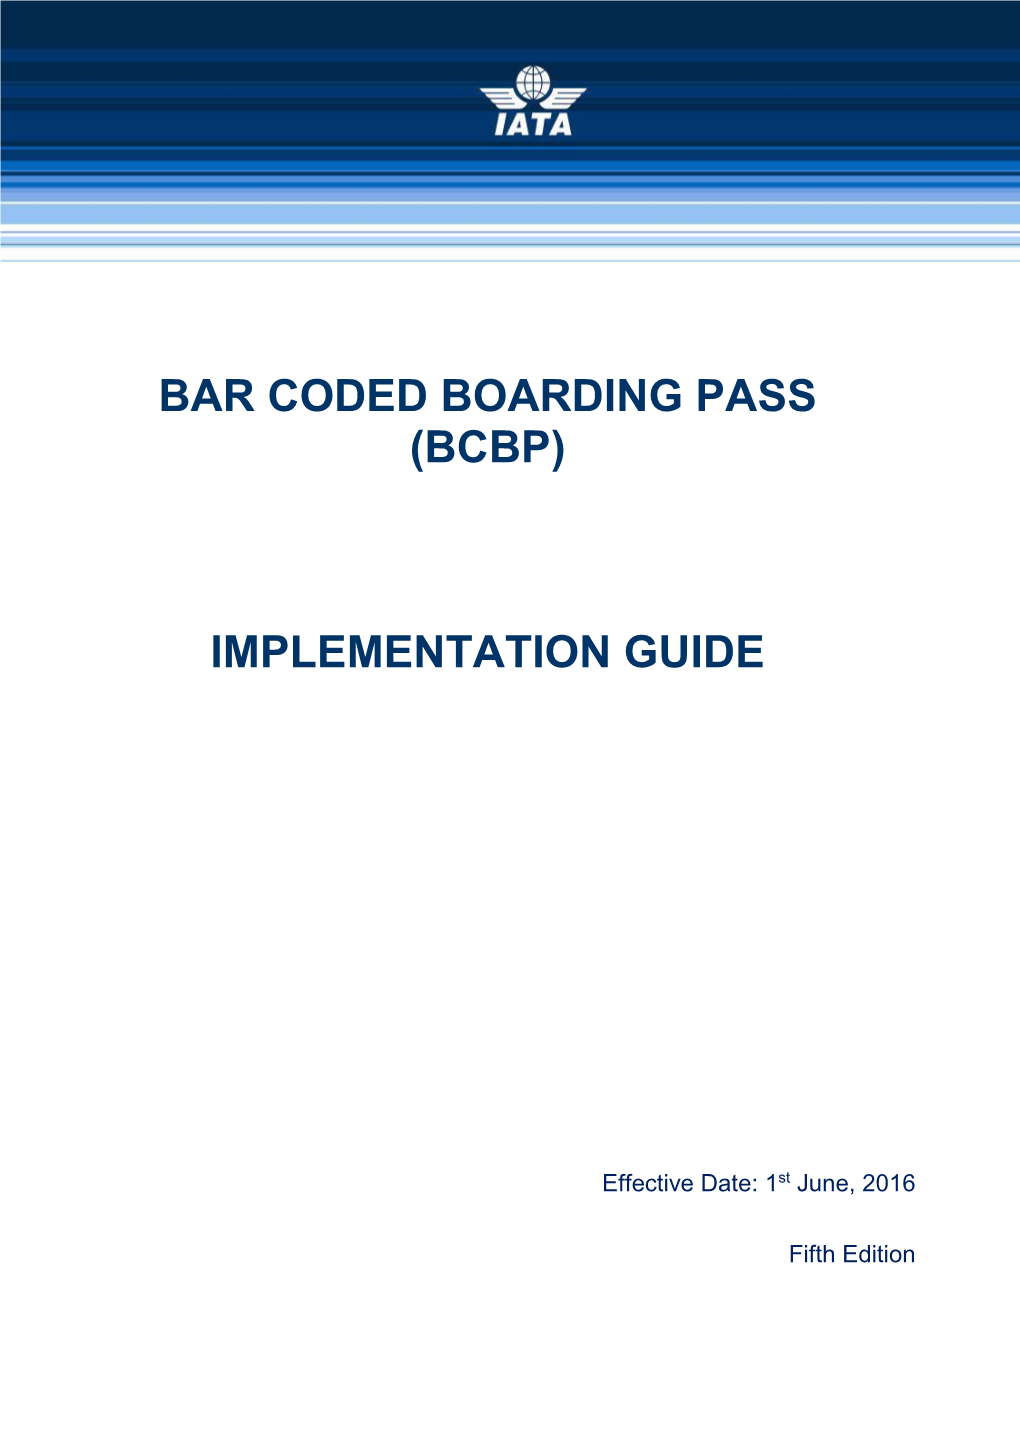 Bar Coded Boarding Pass (Bcbp) Implementation Guide